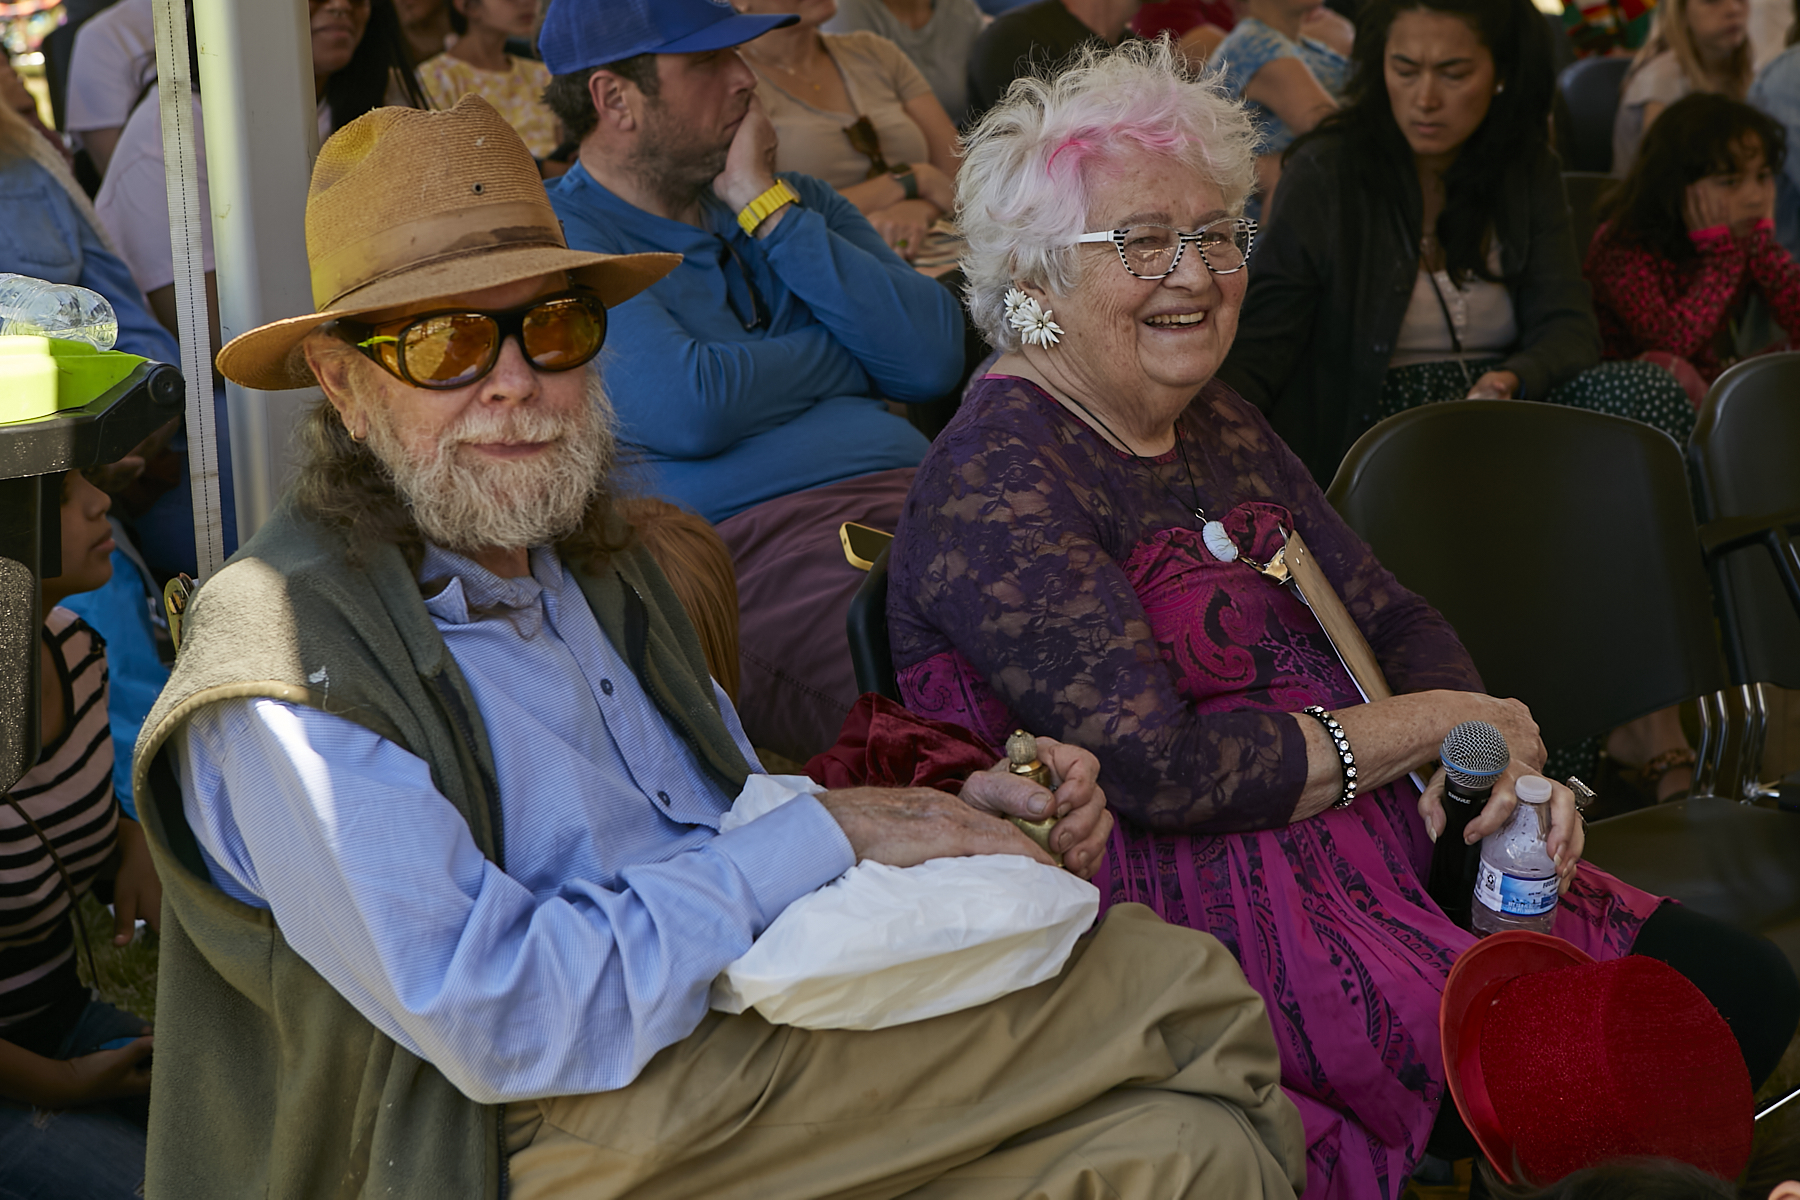 A bearded man wearing sunglasses and a hat (Snuffy Smith) and a woman with white hair and pink stripe, wearing a purple dress (Pam Smith) smiling at the camera